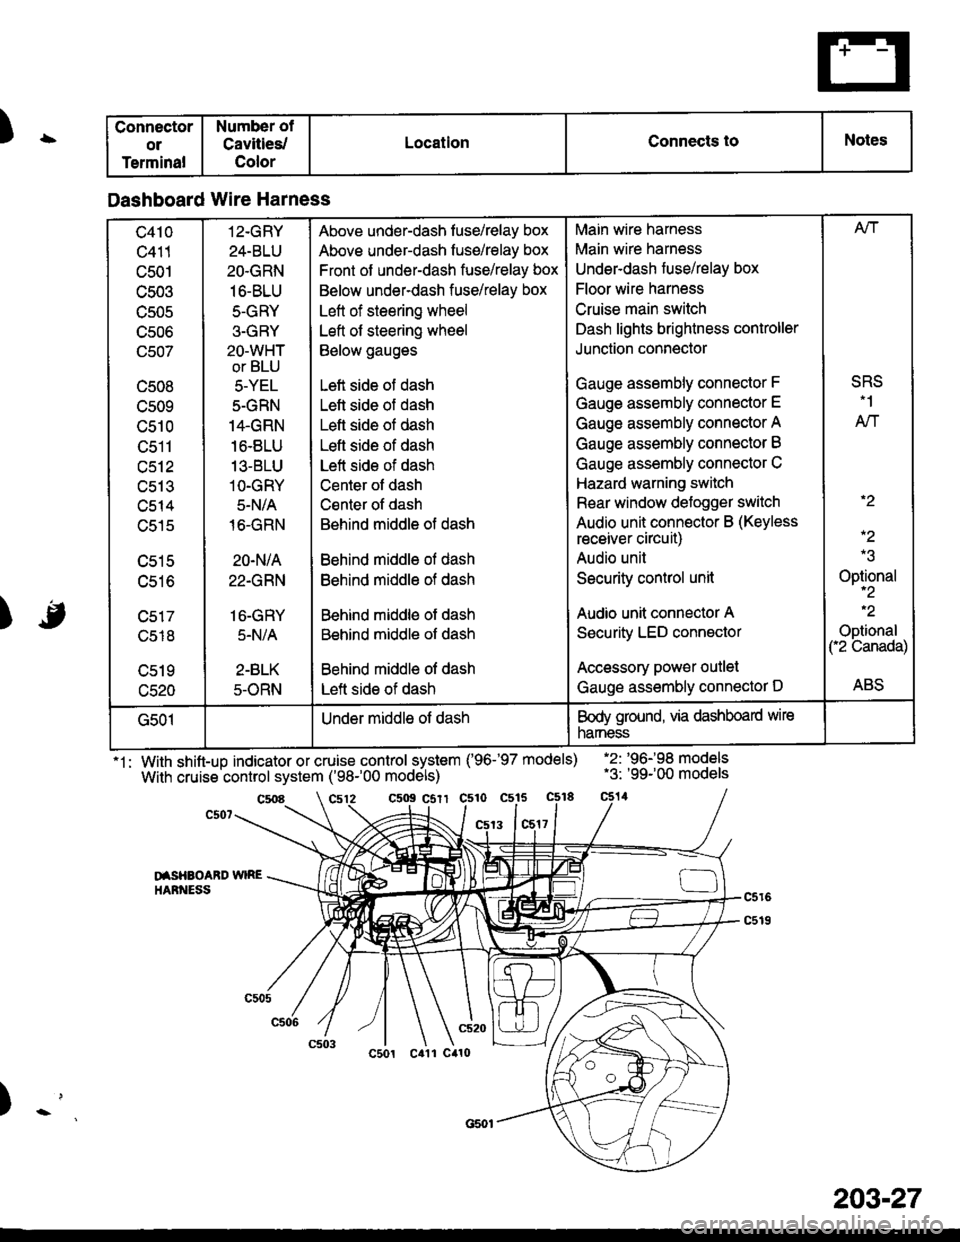 HONDA CIVIC 1996 6.G Manual PDF )\
) -,
.
1: With shift-up indicator or cruise control system (96-97 models)
With cruise control system (98-00 models)
.2: 96198 models.3: 99-00 models
c5o9 csrr c510 c515
13 1c517
DISHAOABD 